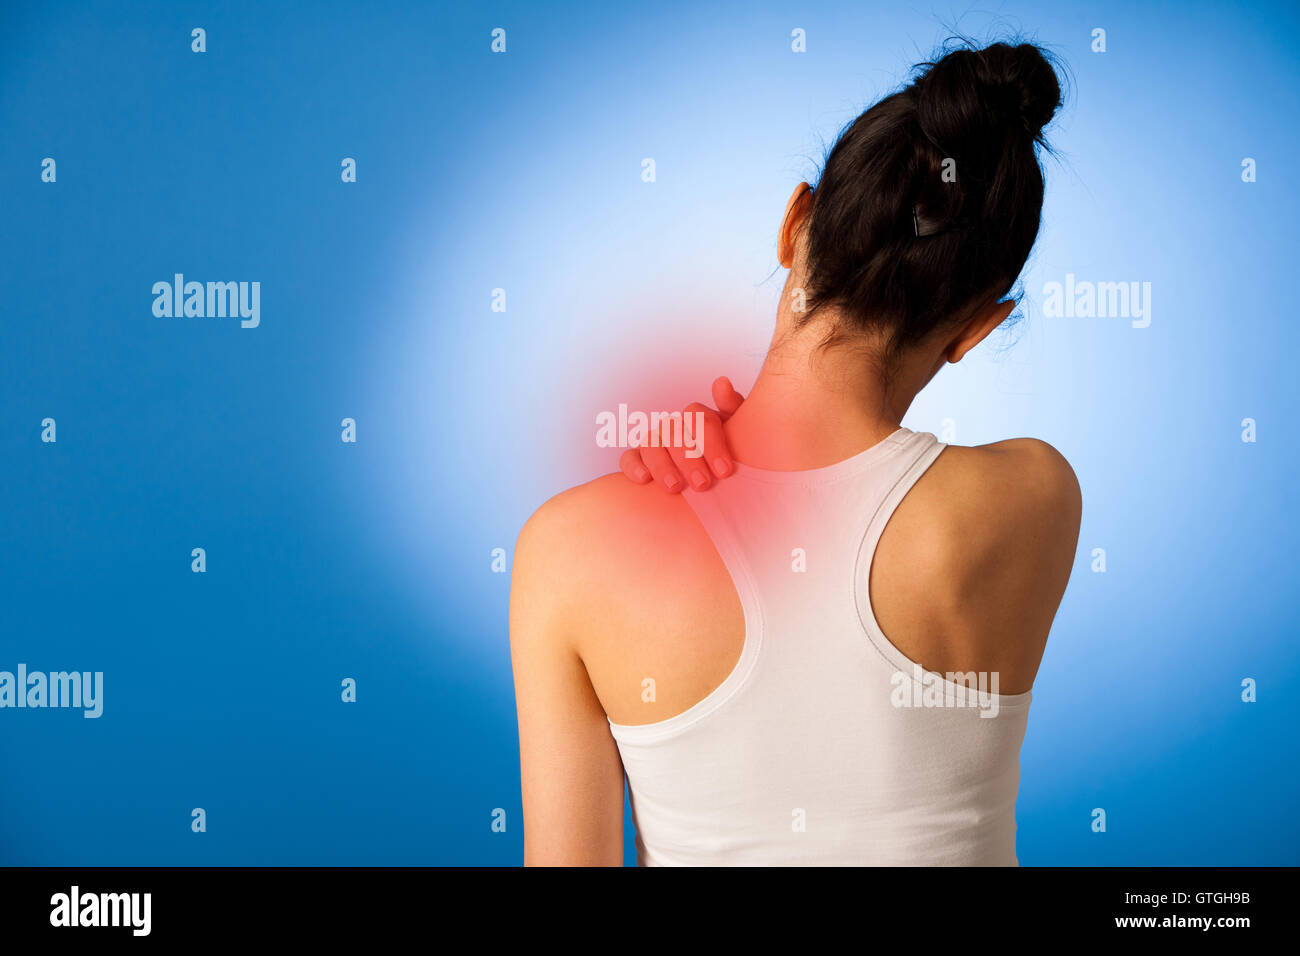 Waman having pain in her neck over blue background Stock Photo